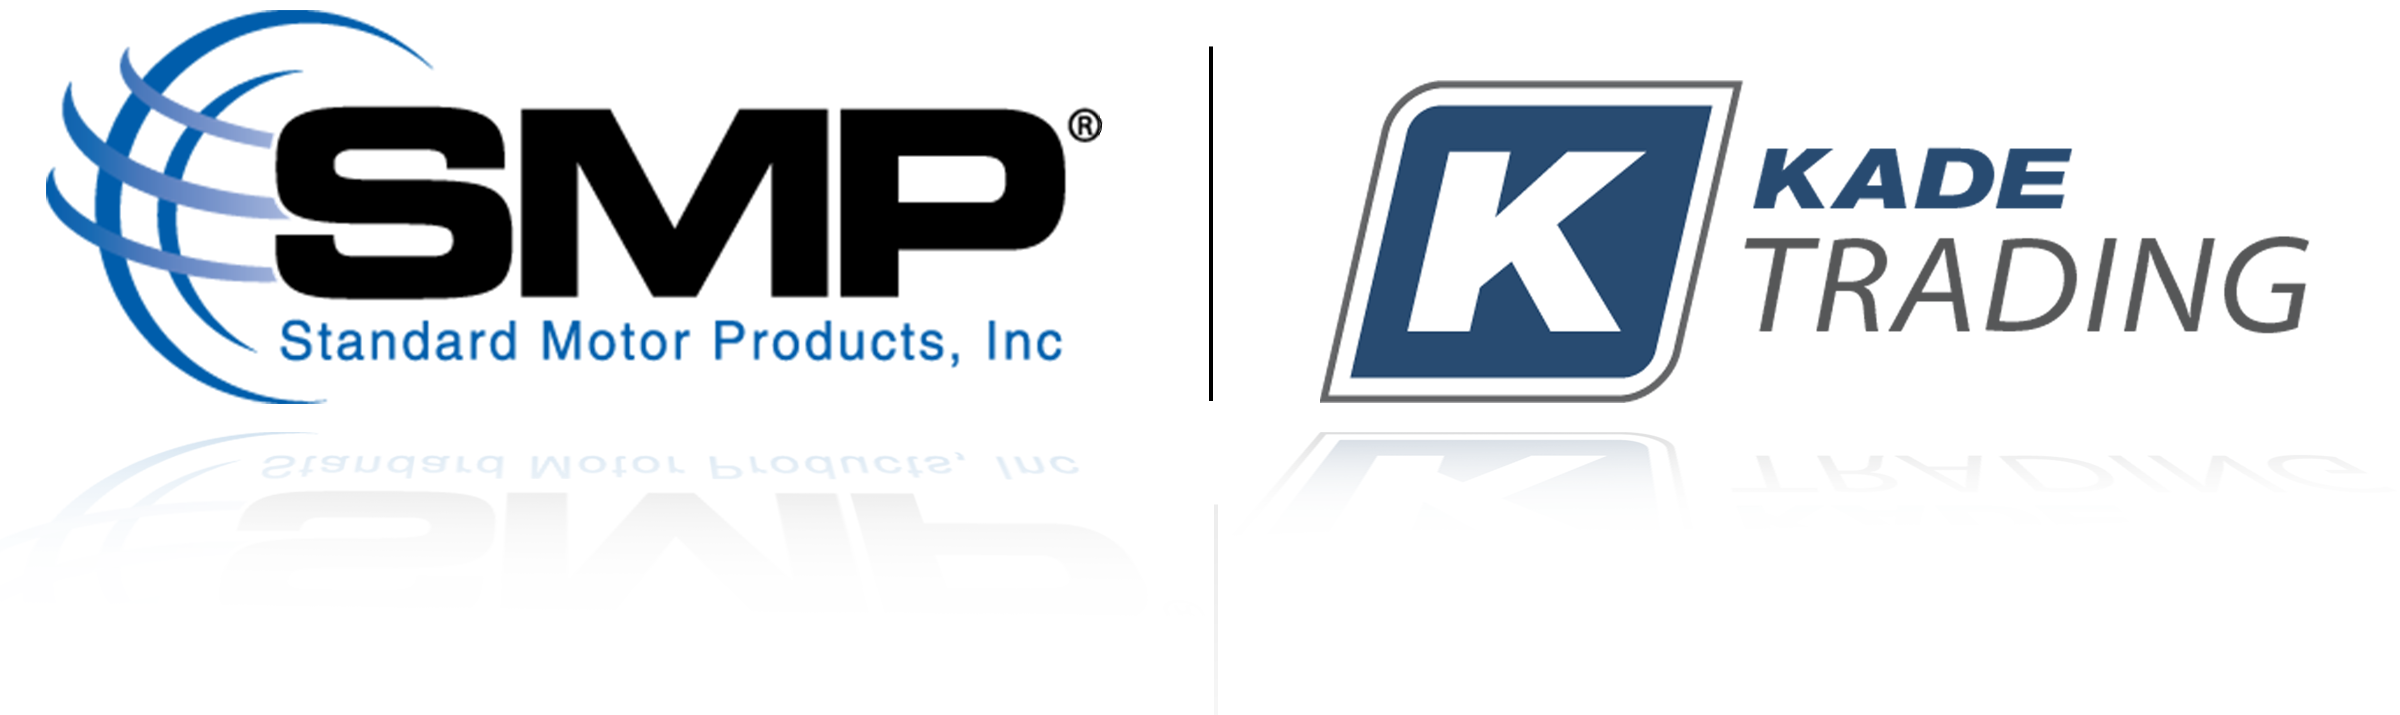 Standard Motor Products, Inc. Announces Acquisition of Kade Trading GmbH